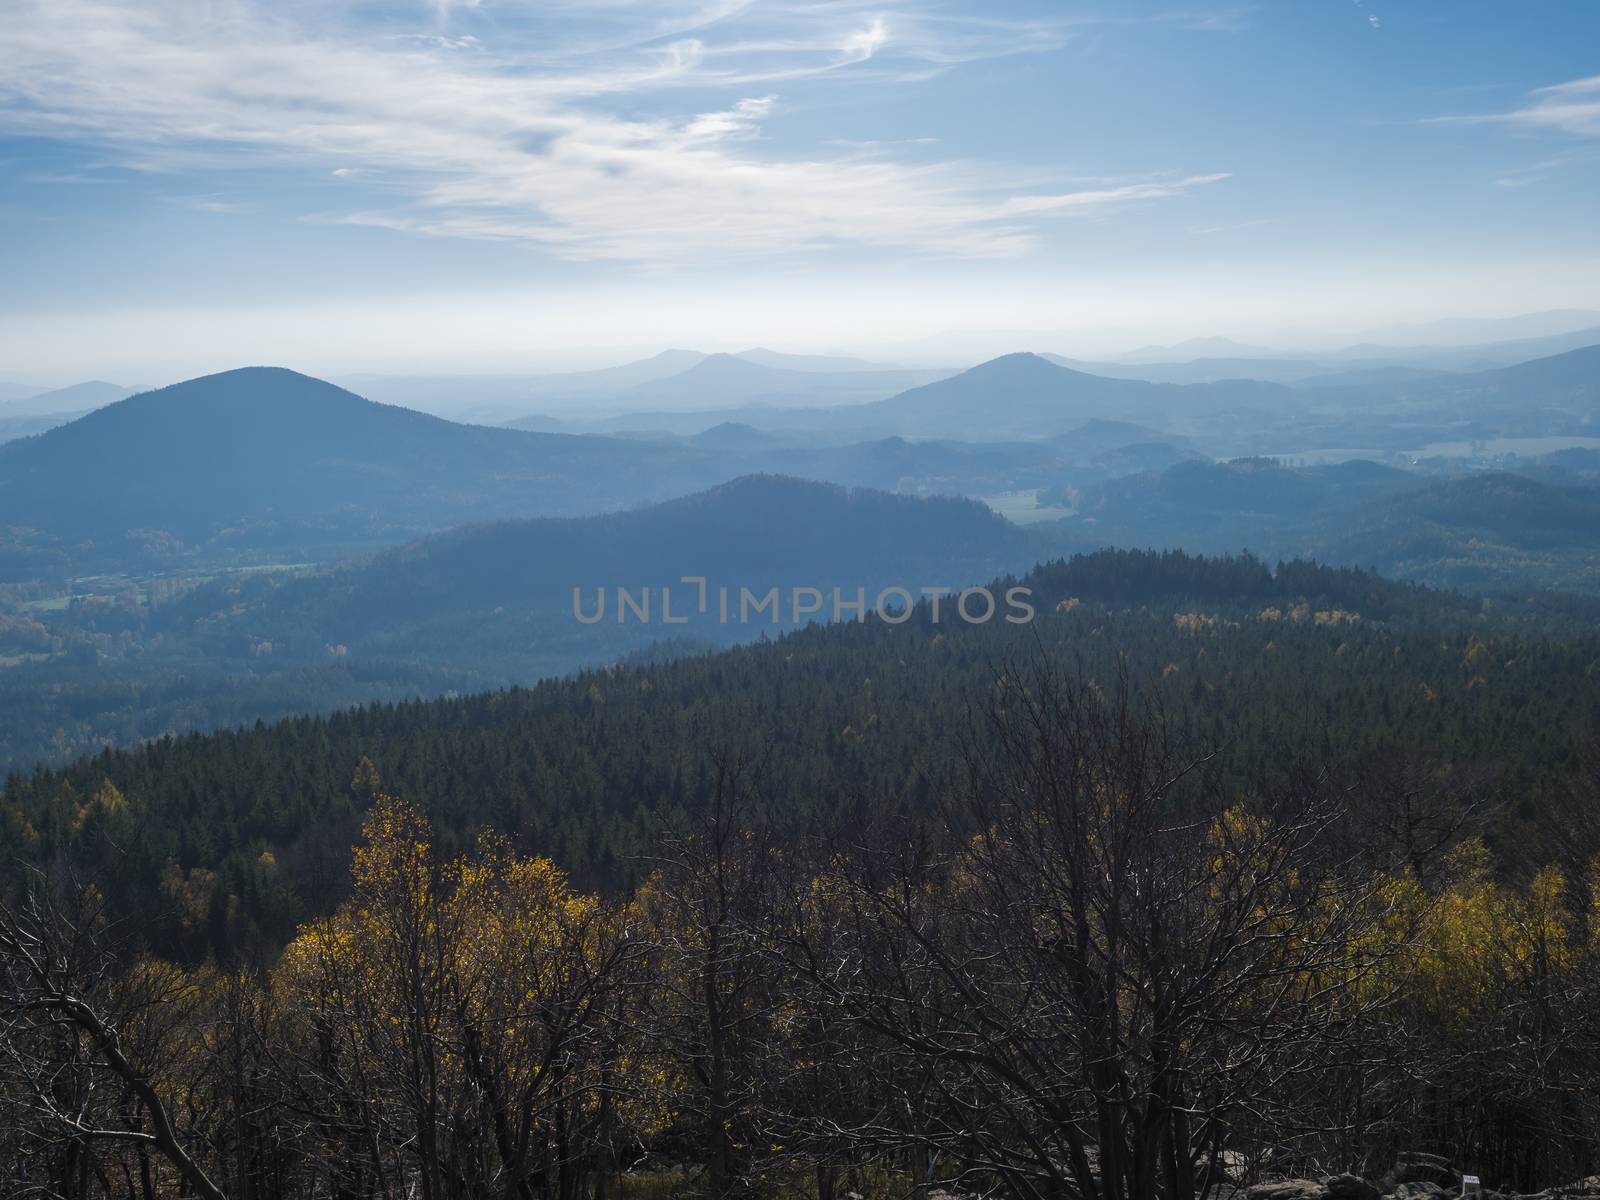 Luzicke hory panorama, view from Hochwald Hvozd, the most attractive view-points of the Lusatian Mountains with autumn colored deciduous and coniferous tree forest and green hills, golden hour light by Henkeova